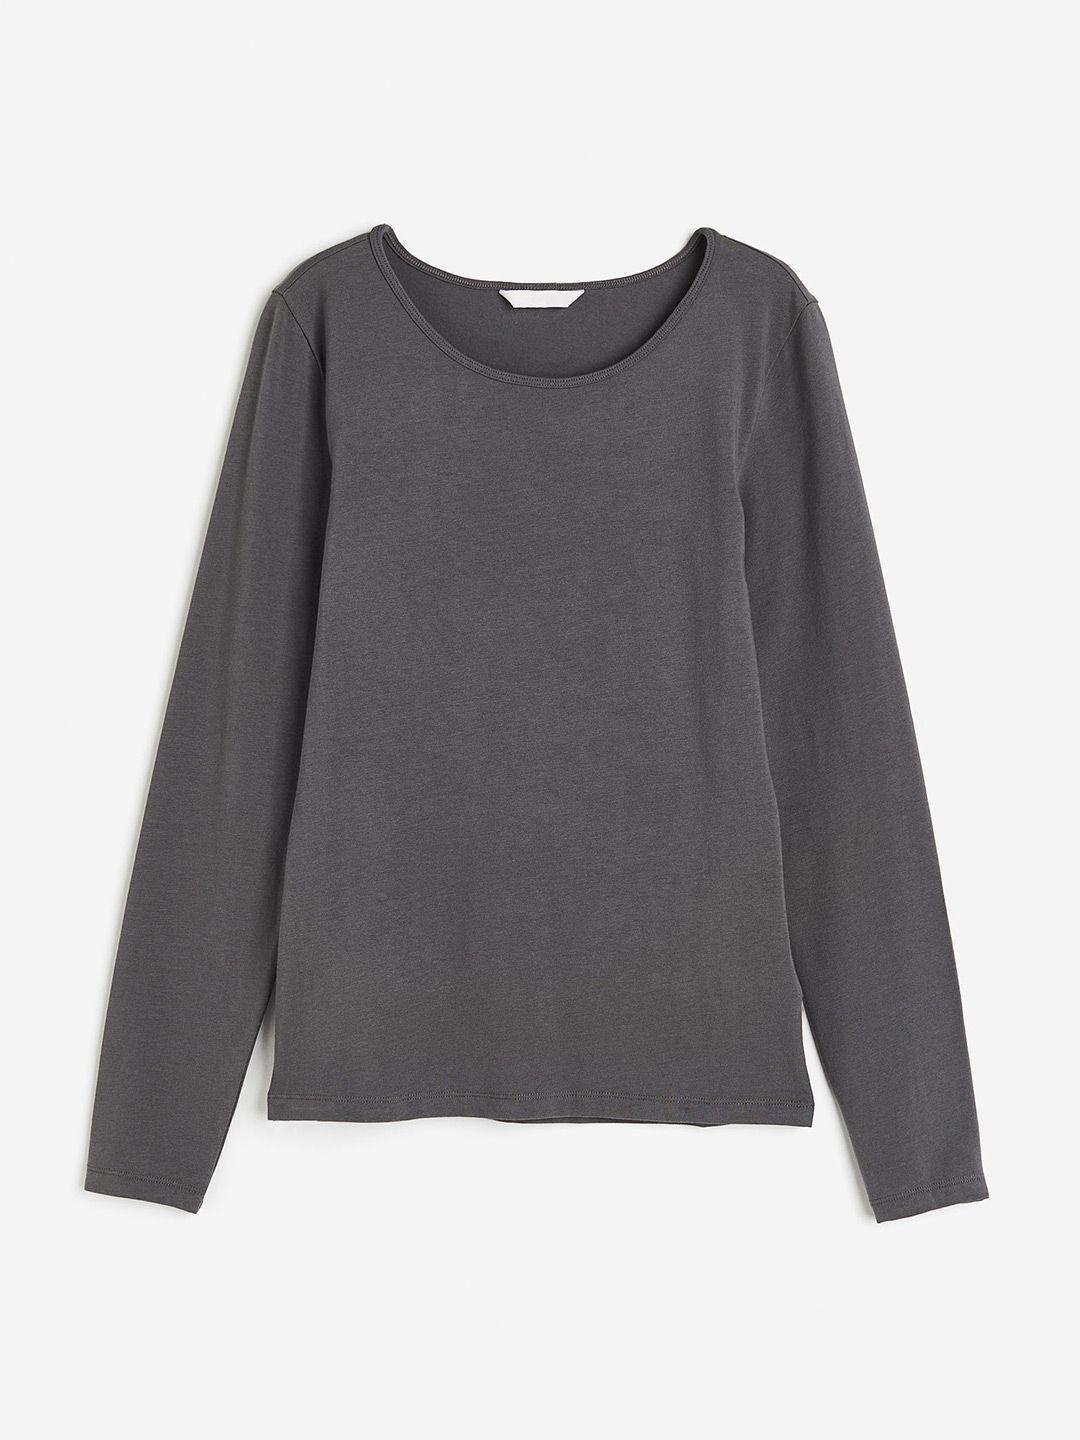 h&m long sleeves jersey top